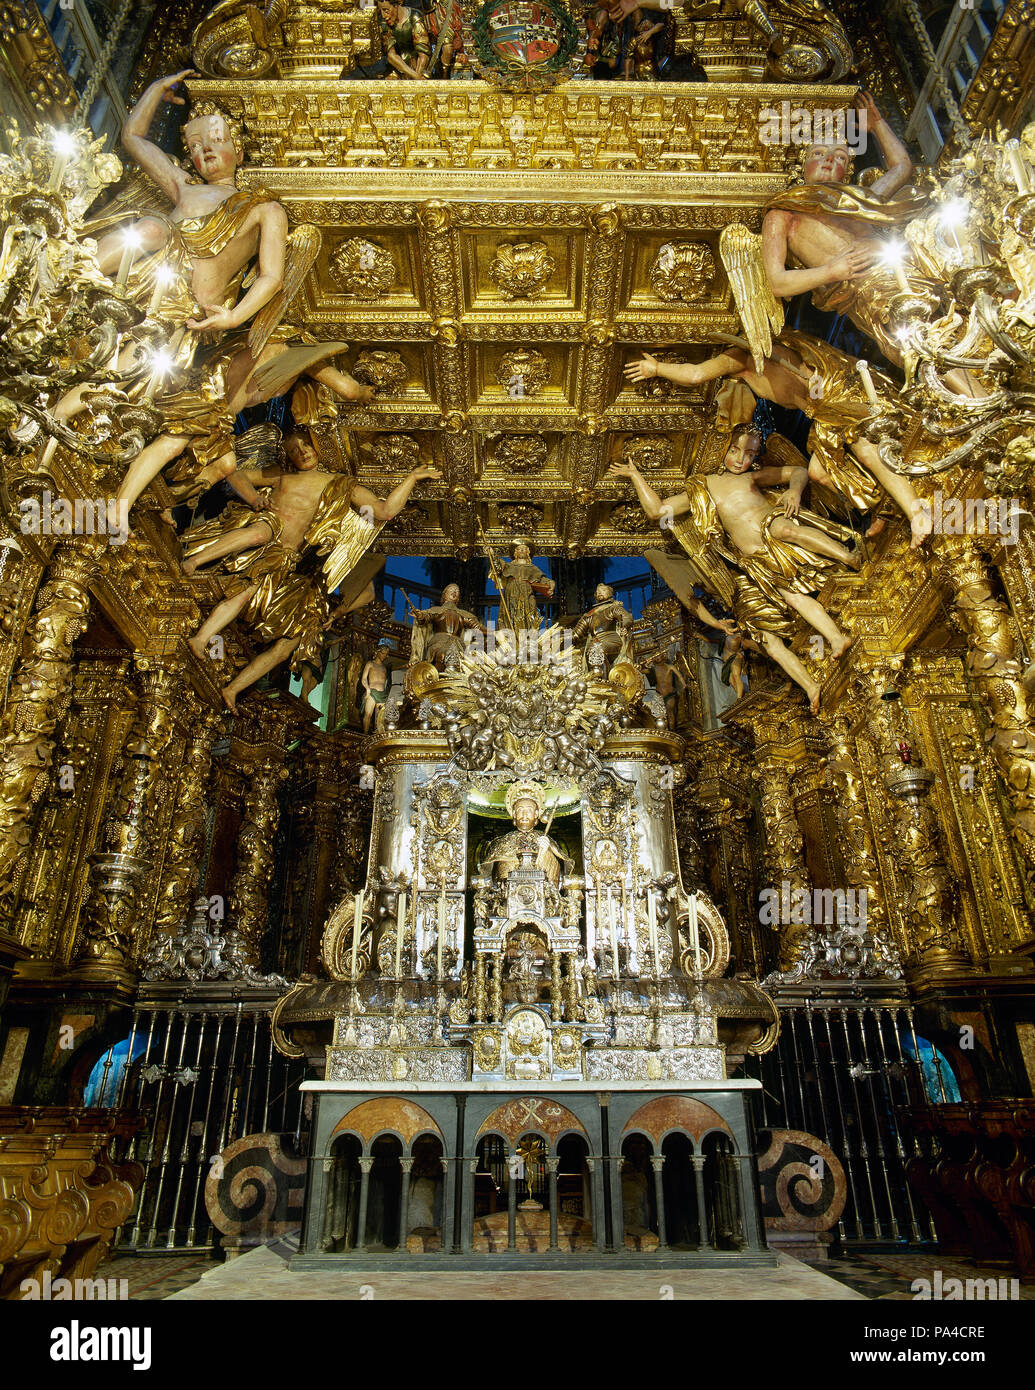 Main altar of the Cathedral of Santiago de Compostela. Gothic altar remodeled in exuberant baroque by Jose Vega y Verdugo. The Baldachin,17th century, author Domingo de Andrade (1639-1712). A bejeweled medieval statue of St. James (12th century). Santiago de Compostela Cathedral. Santiago de Compostela, province of La Coruña, Galicia, Spain. Stock Photo